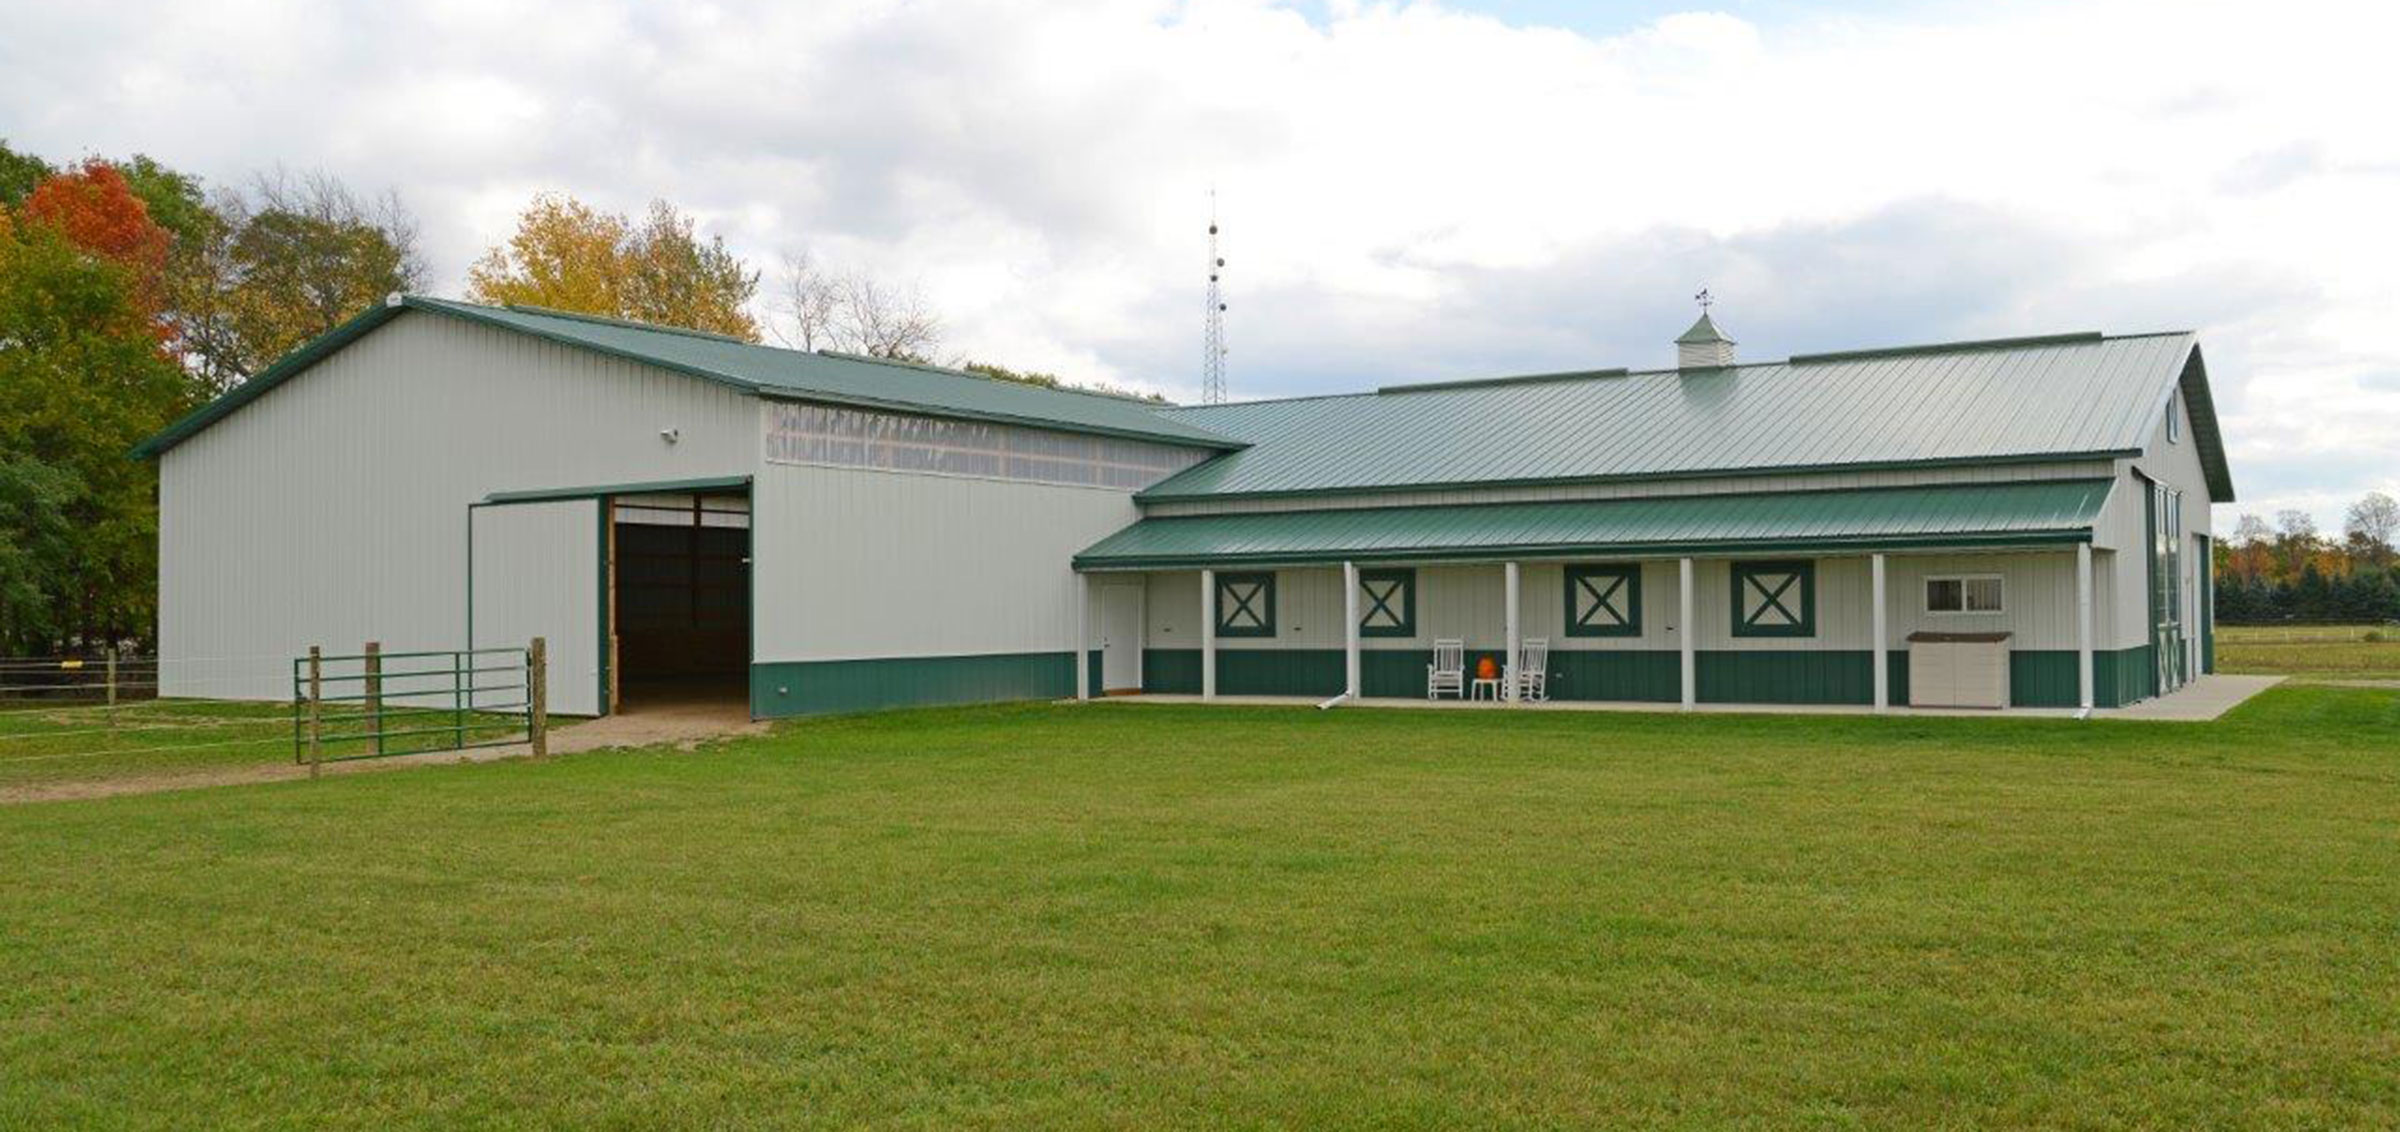 Equestrian Riding Arenas and Stables